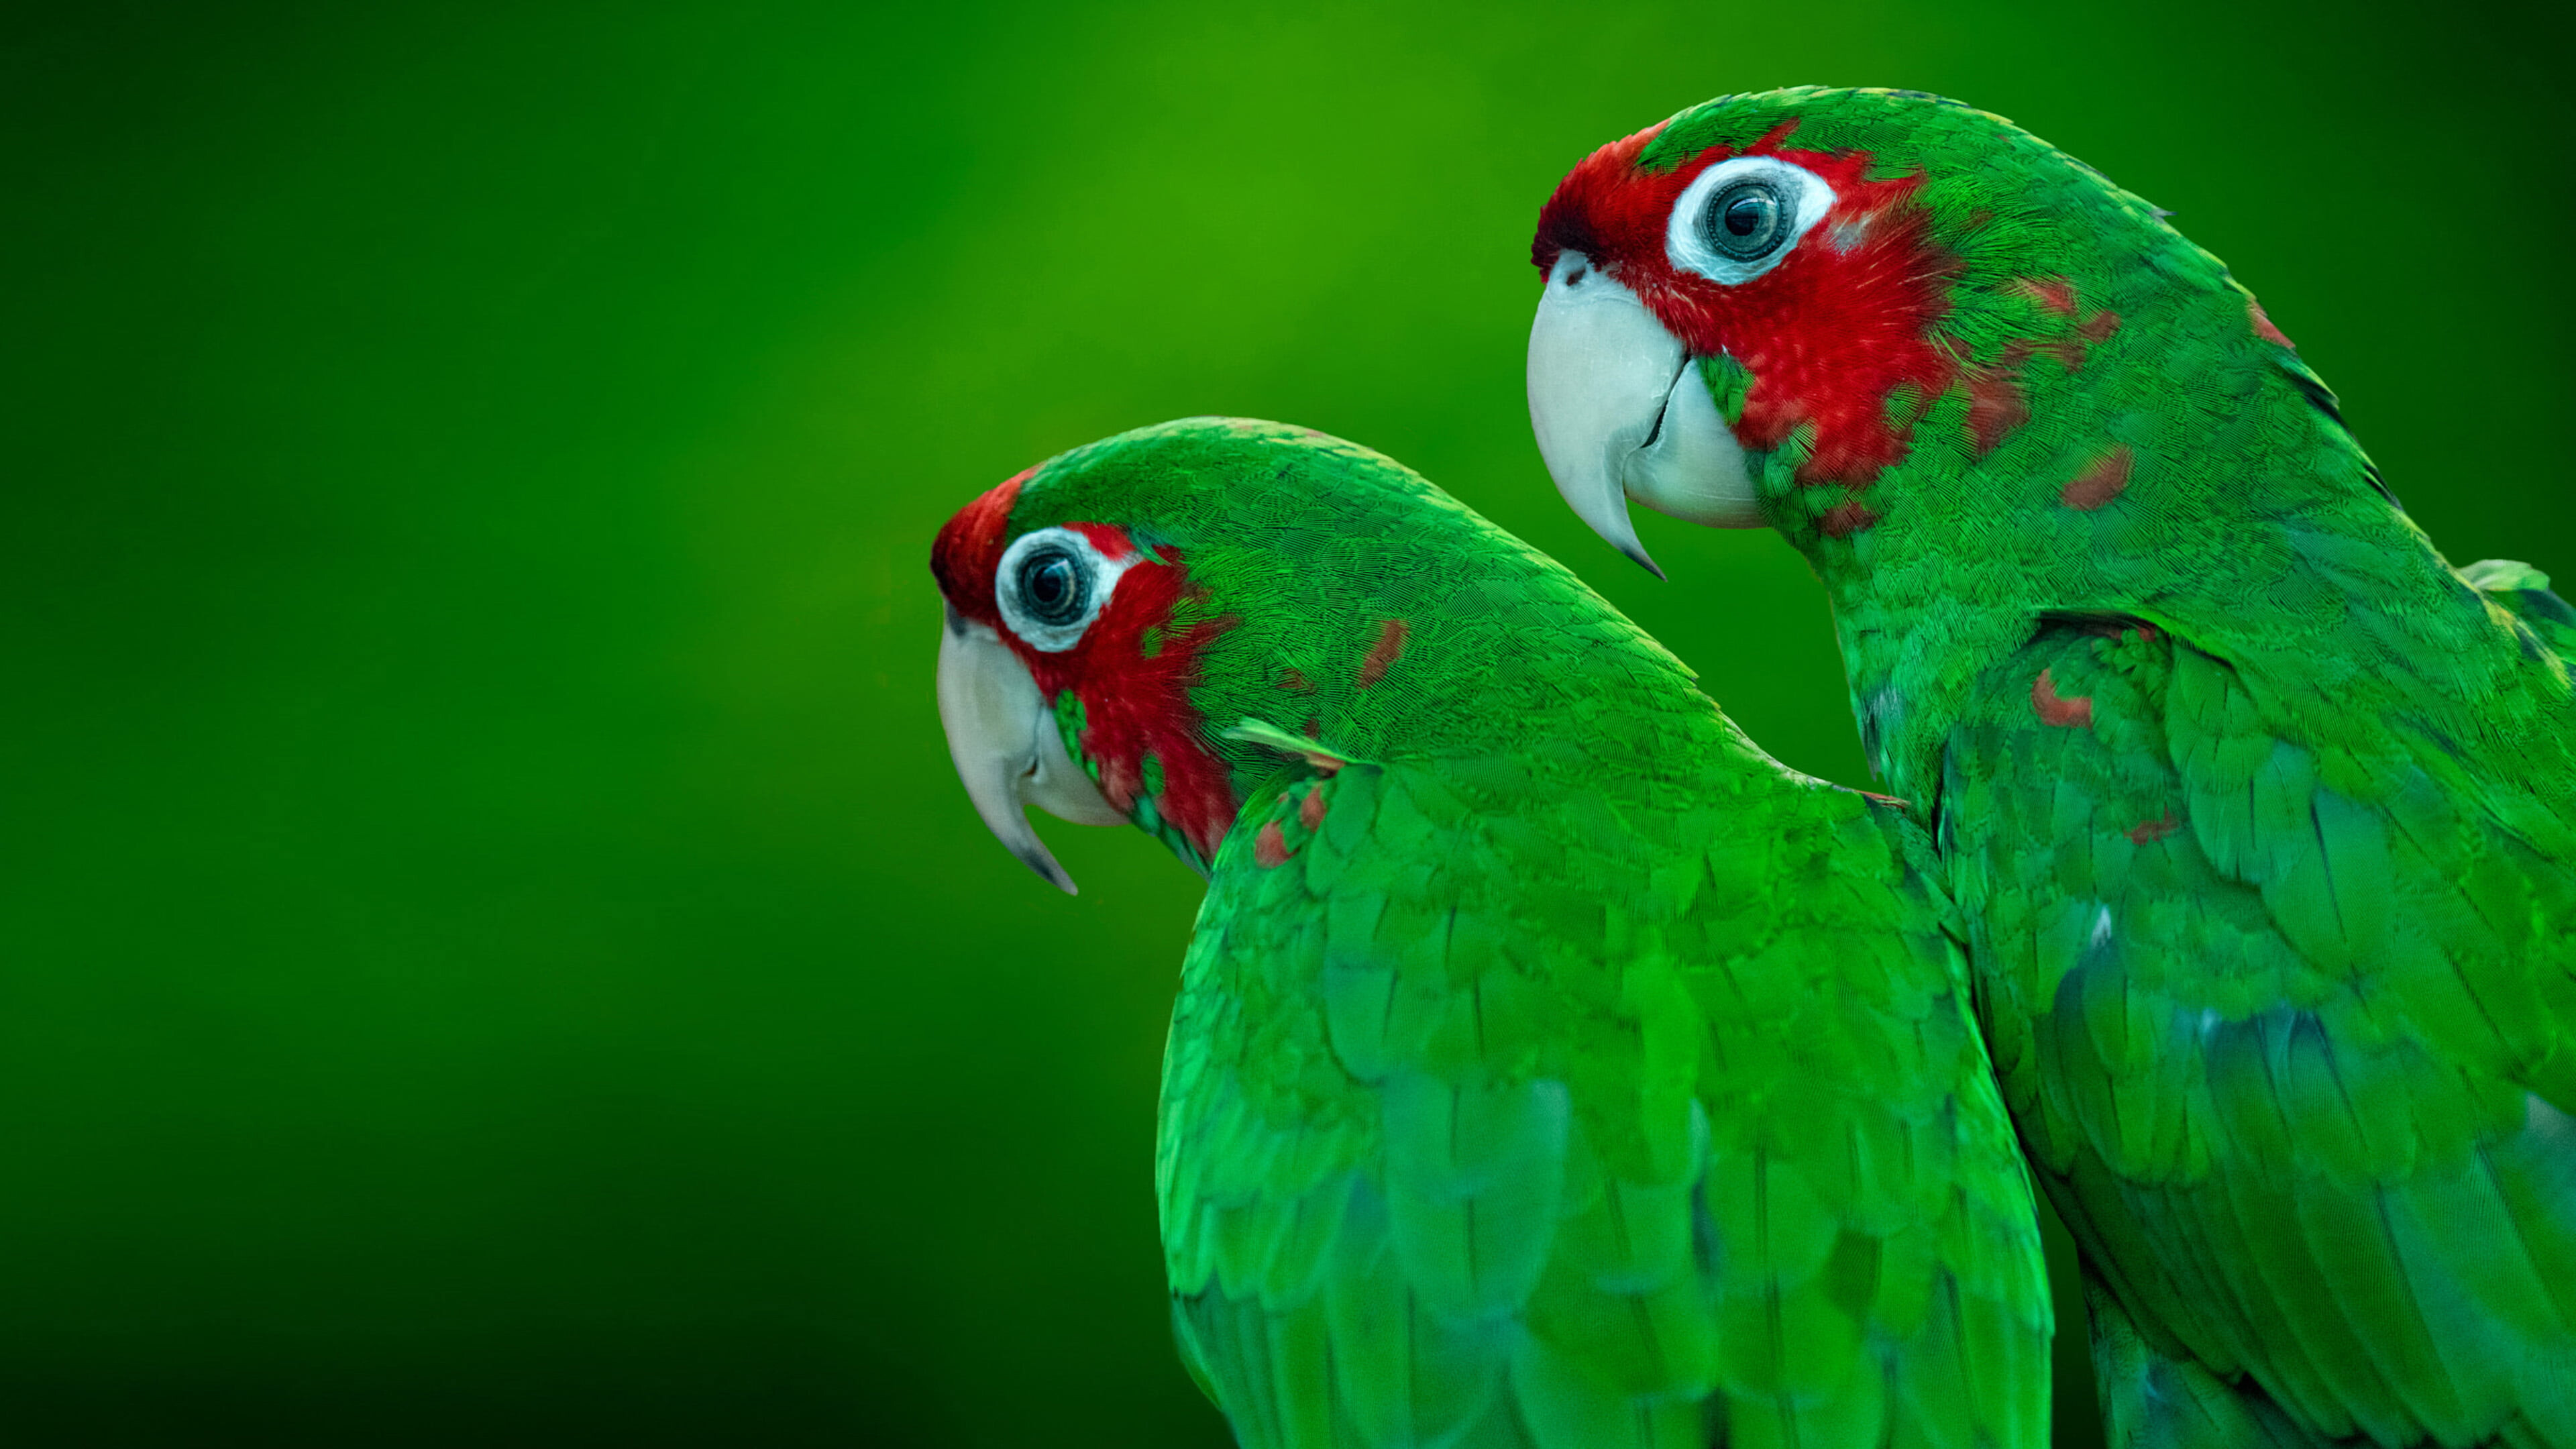 Parrot: The Green Cheeked Amazon Red Headed Parrot, Tropic Birds. 3840x2160 4K Wallpaper.